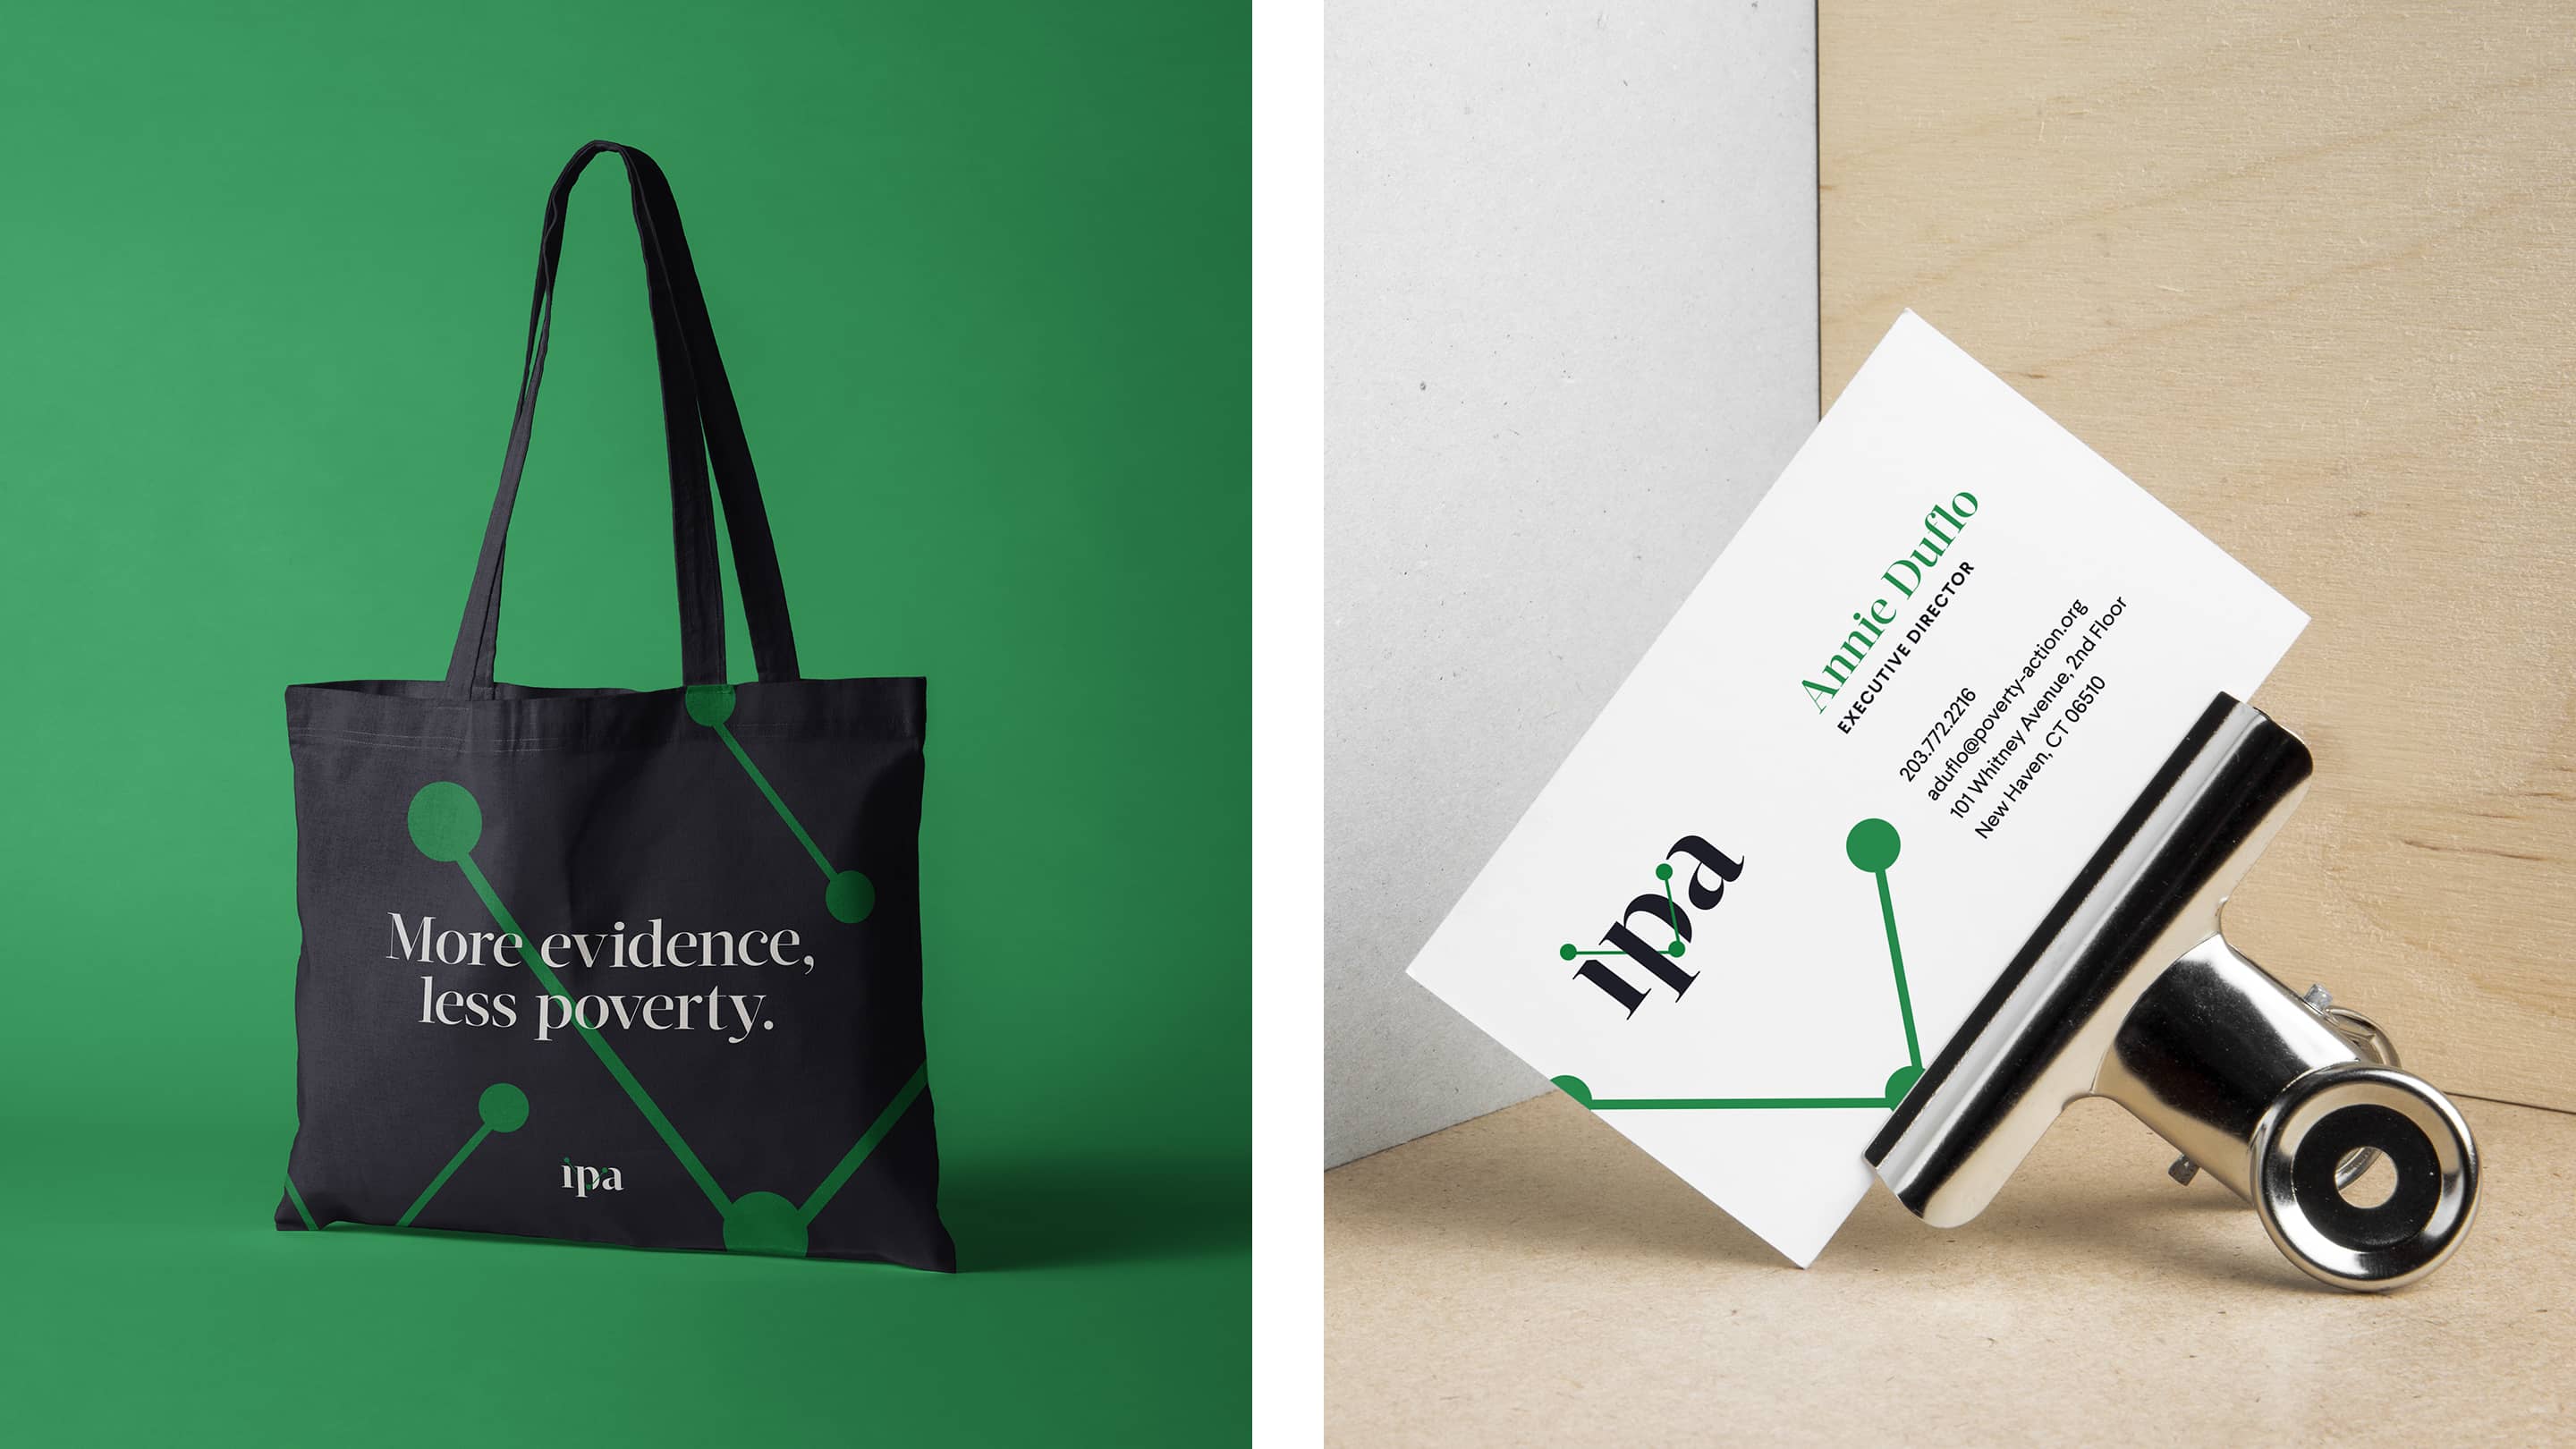 Totebag and business card design for IPA